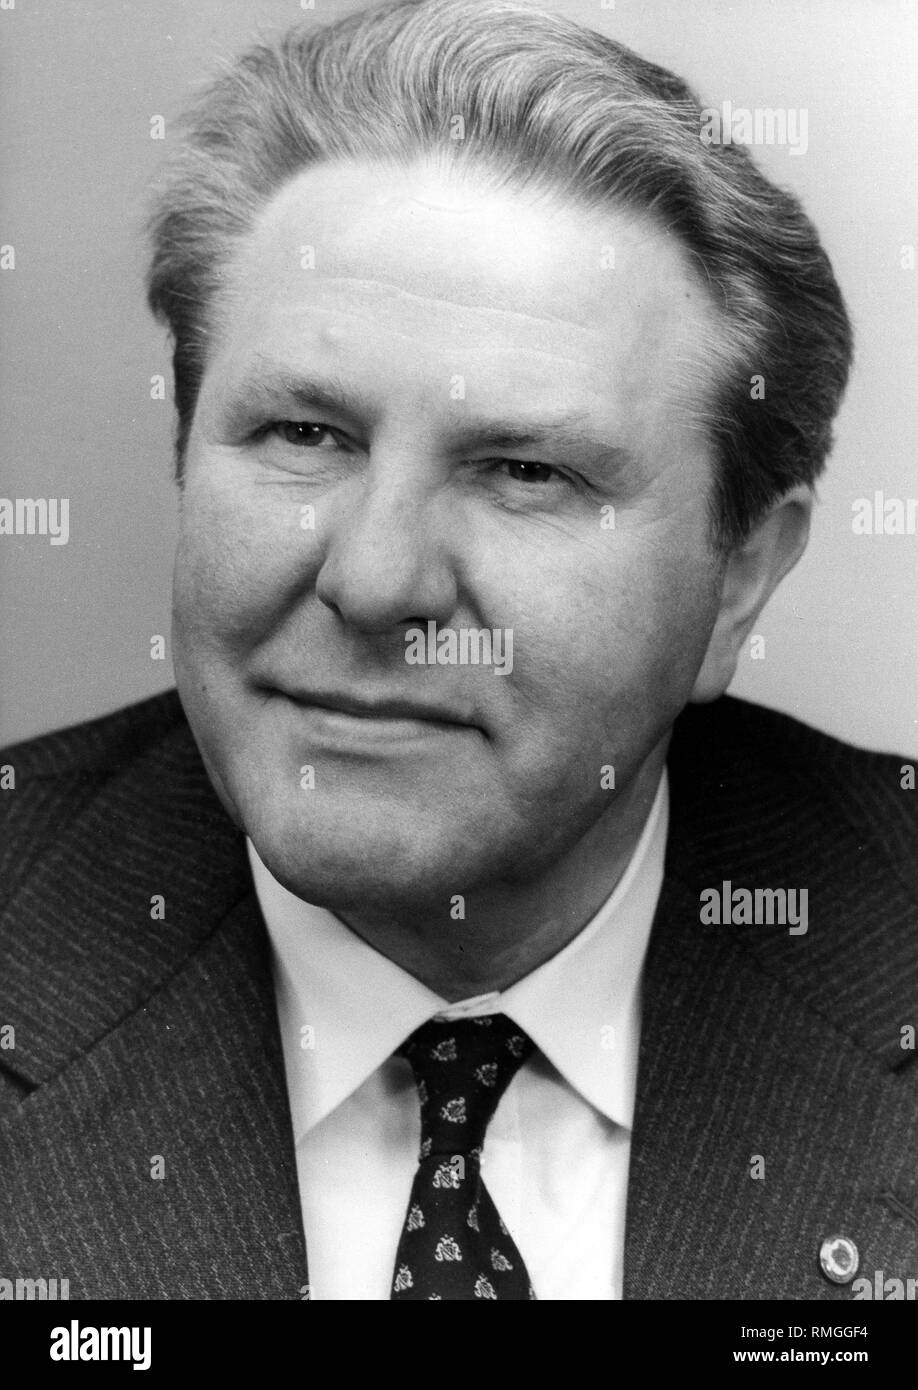 Hans-Joachim Hoffmann (10.10.1929 - 19.07.1994), between 1973 - 1989 GDR Minister of Culture, between 1976 - 1989 Member of the SED Central Committee. Stock Photo